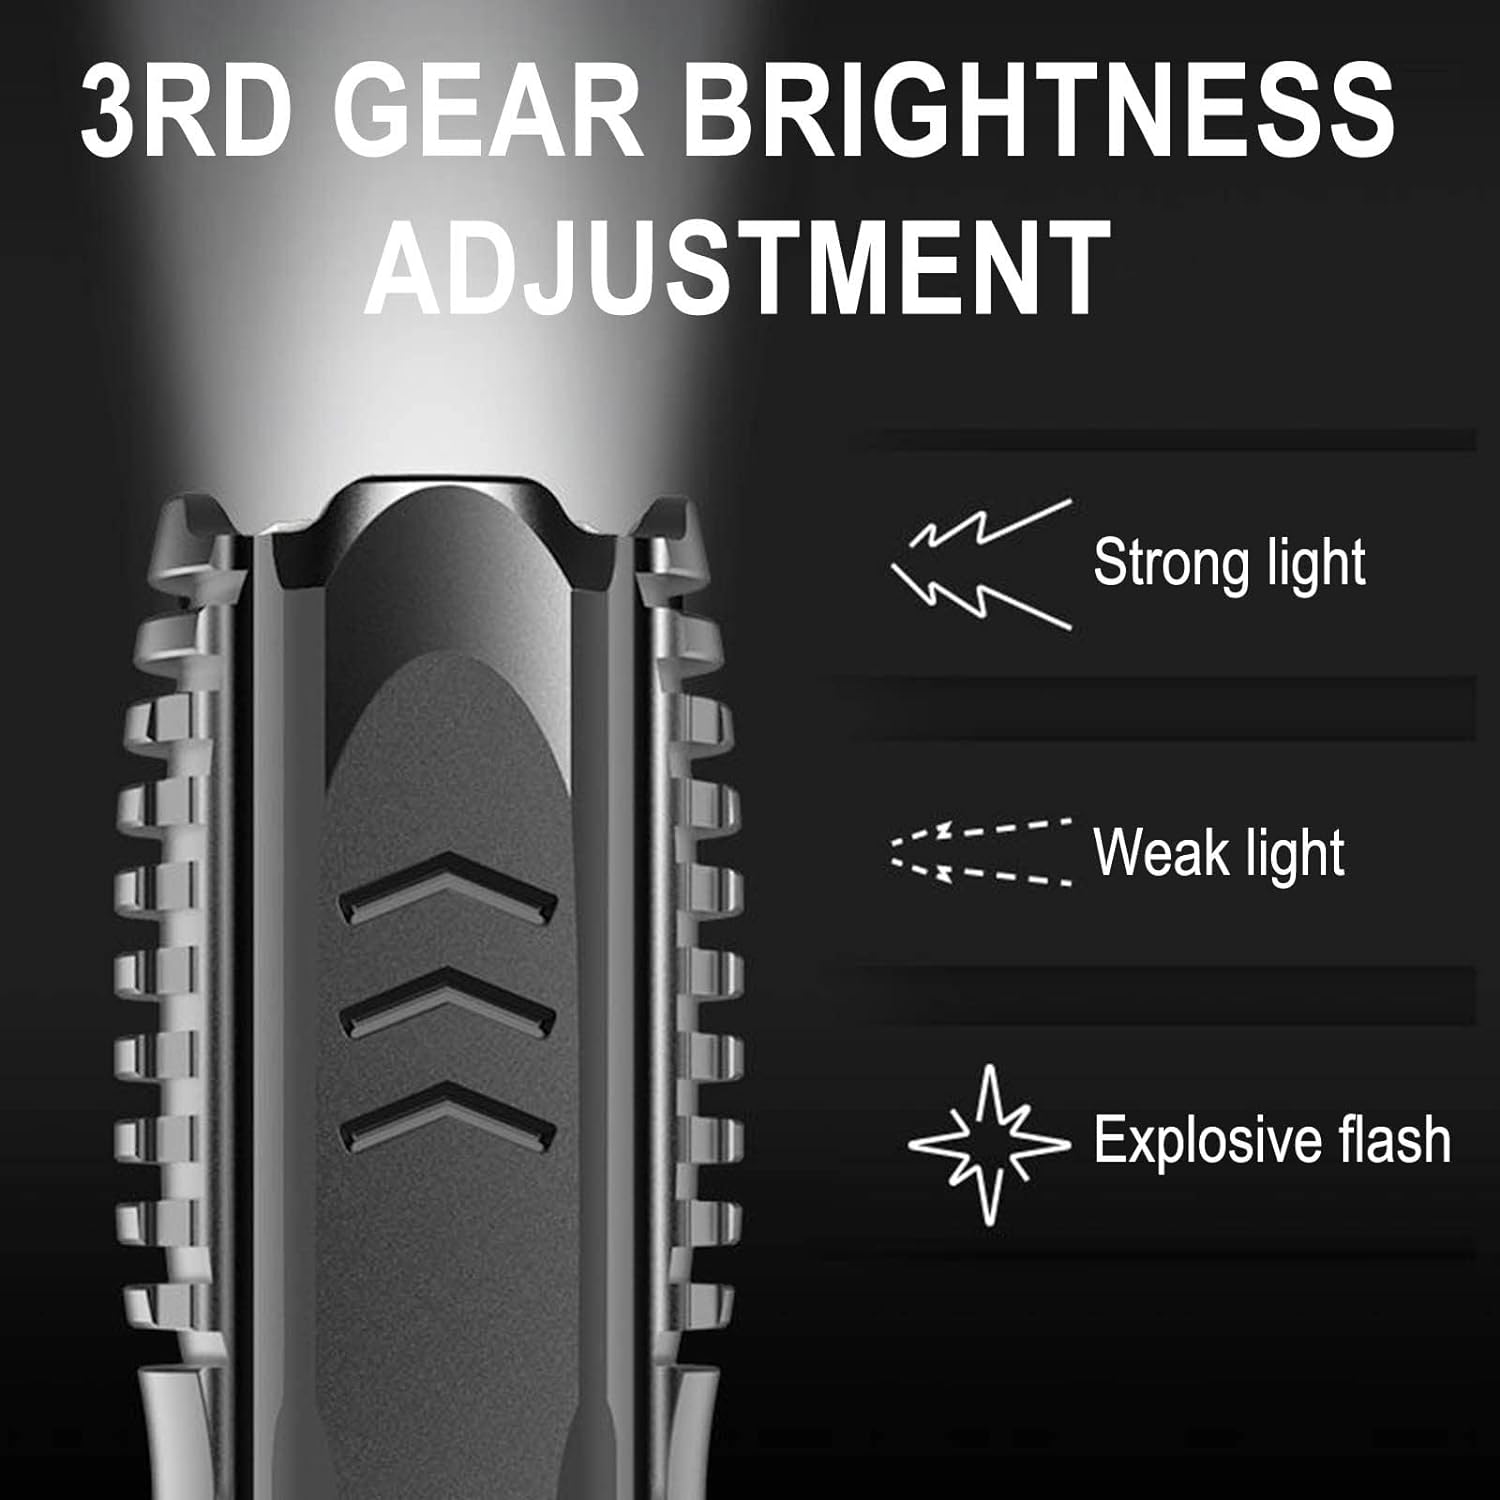 German Technology Multifunctional Rechargeable Flashlight - 50% Off TODAY!